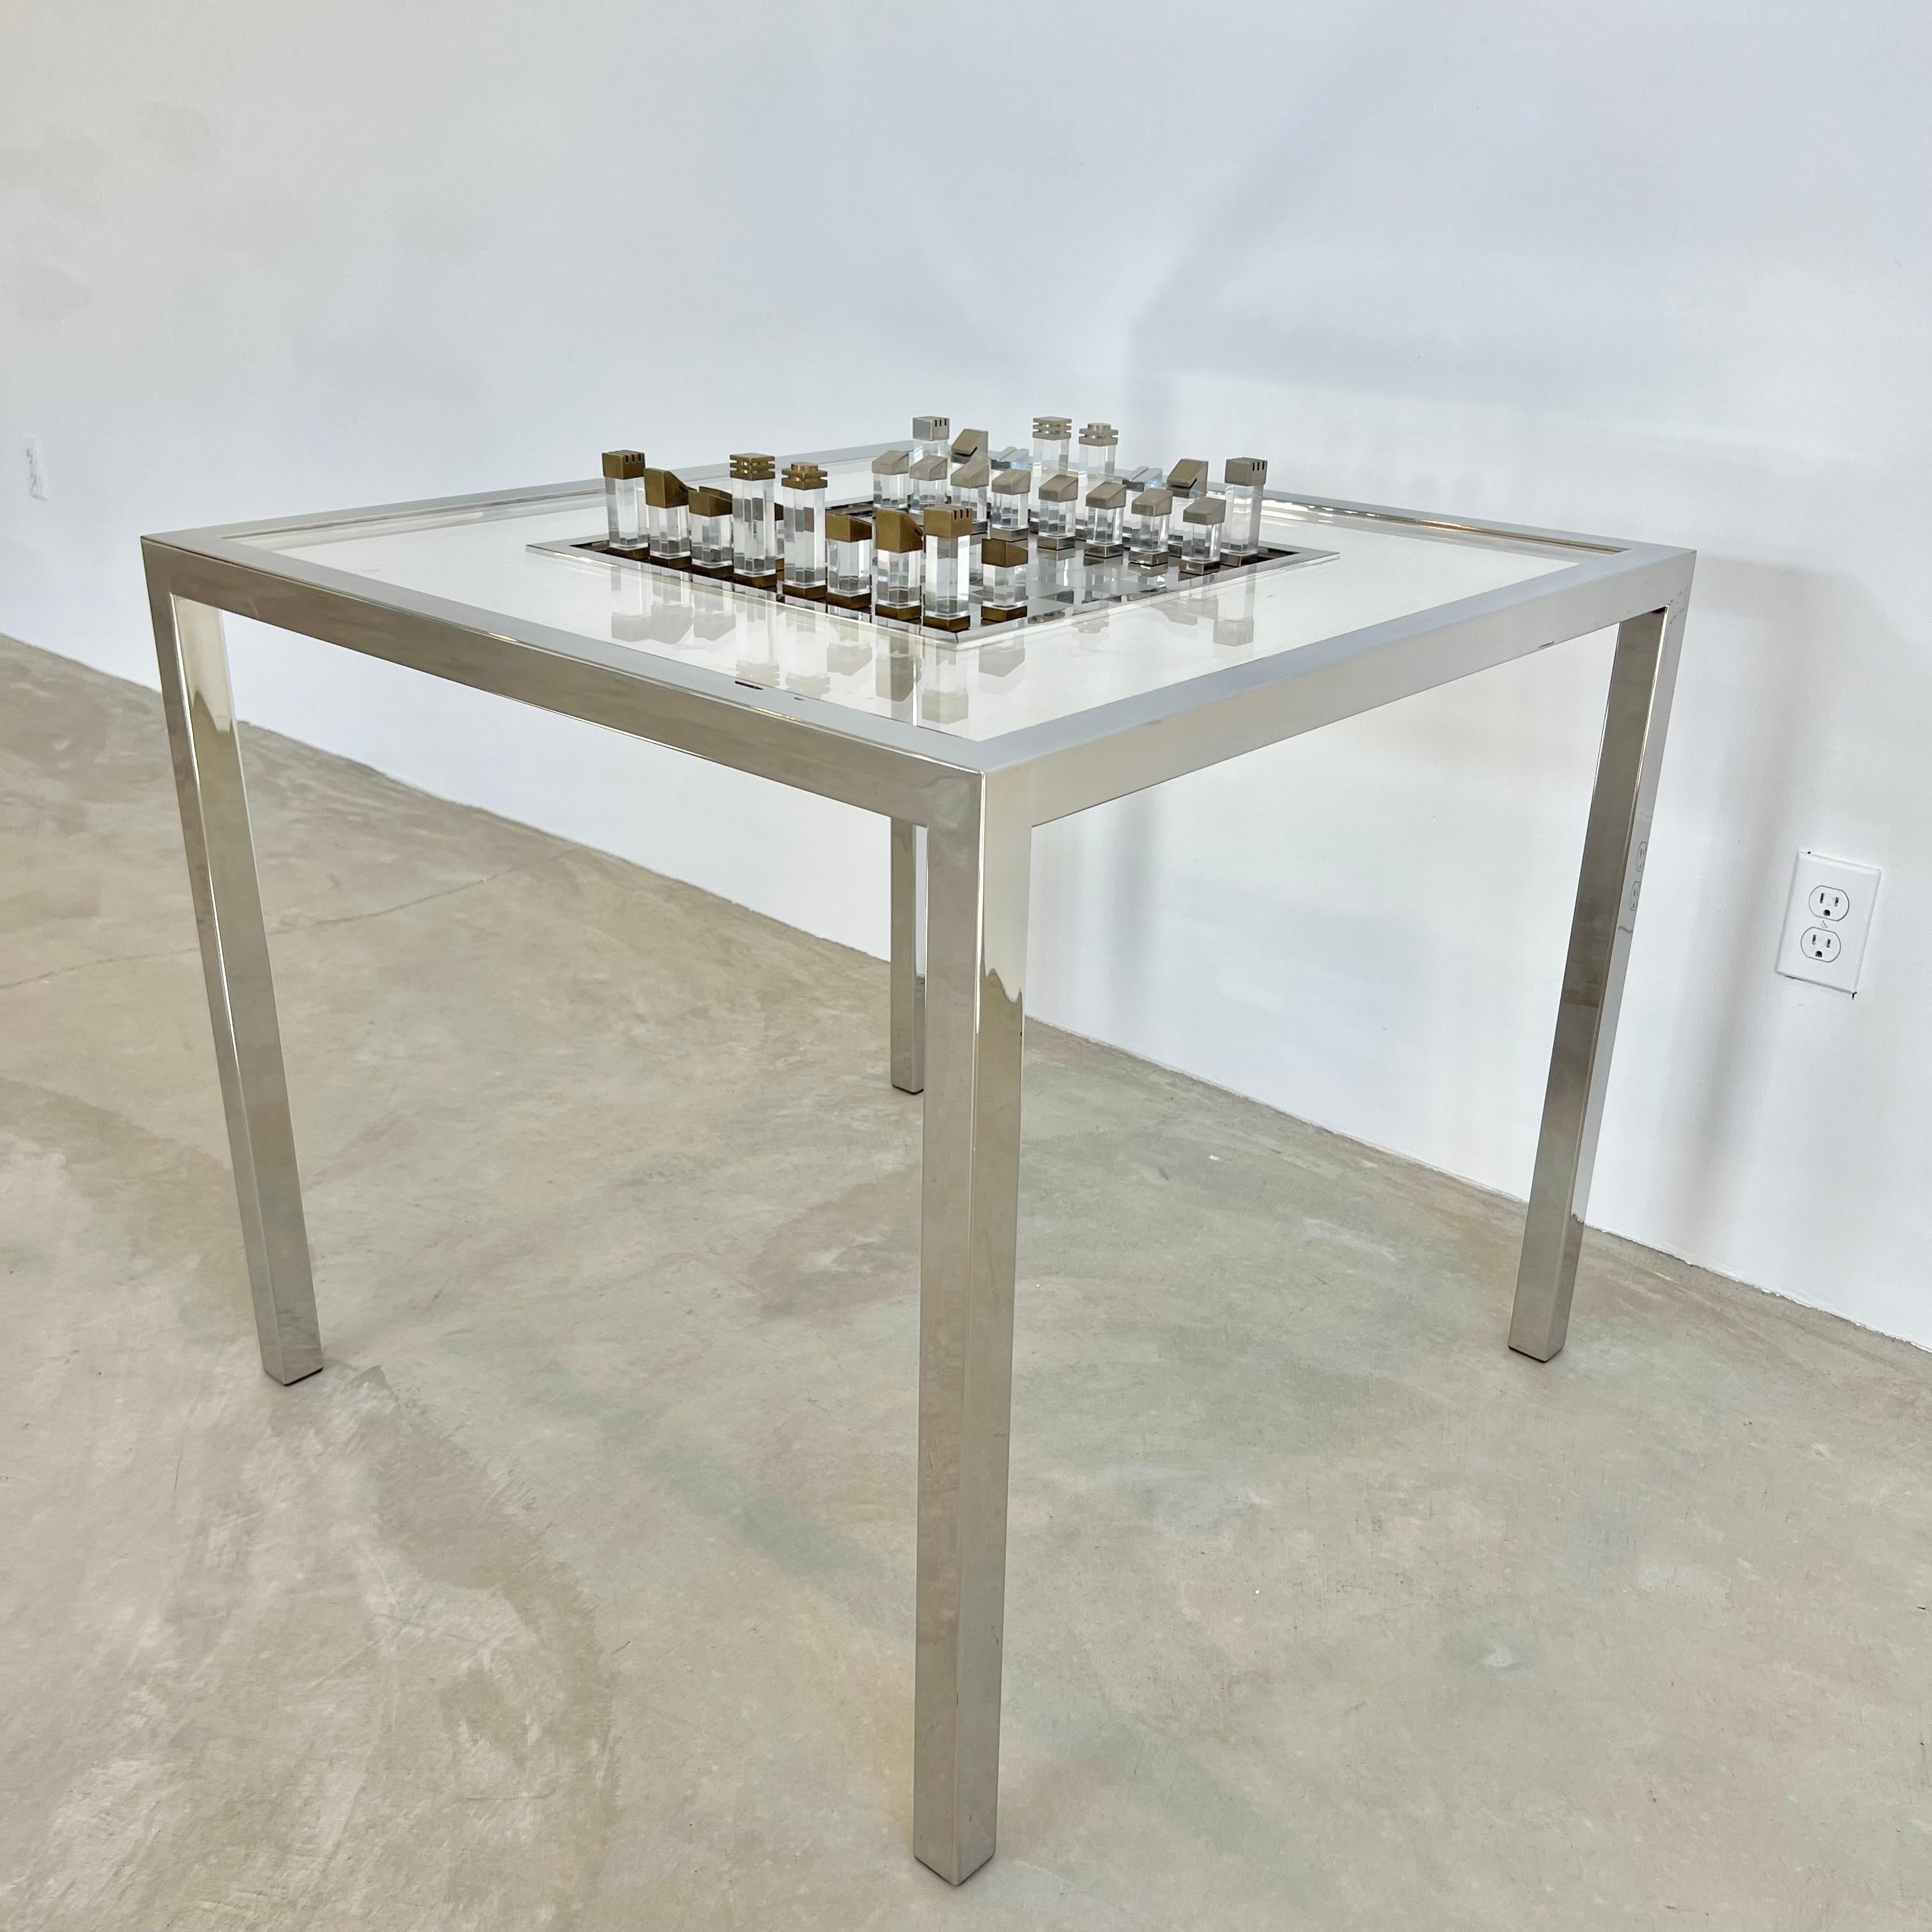 Romeo Rega Perspex Chess Table, 1970s Italy For Sale 11